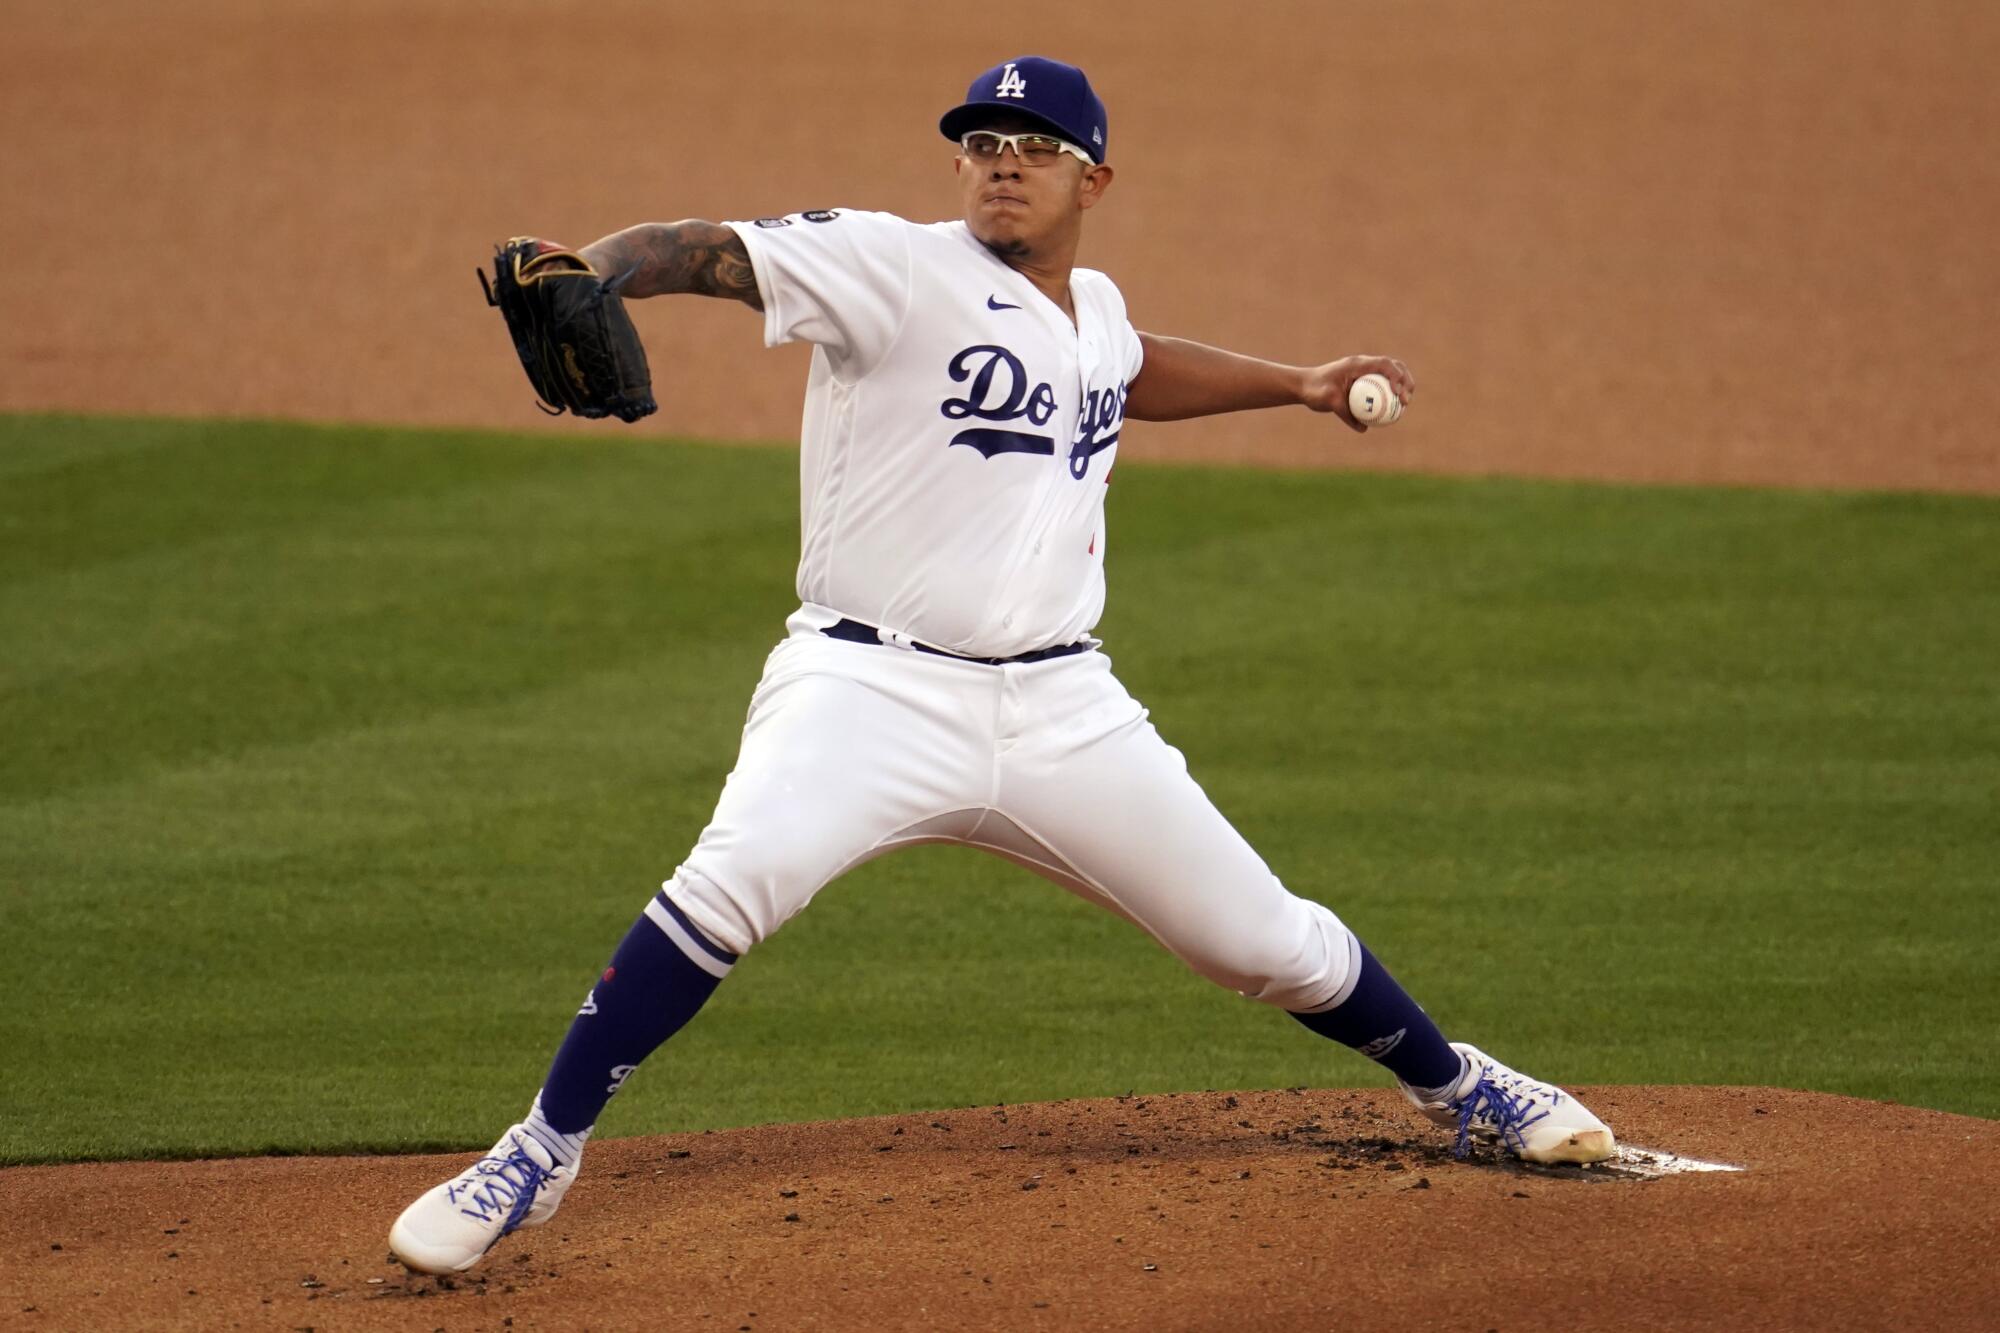 Dodgers vs Mariners: Epic Uniforms for the home team